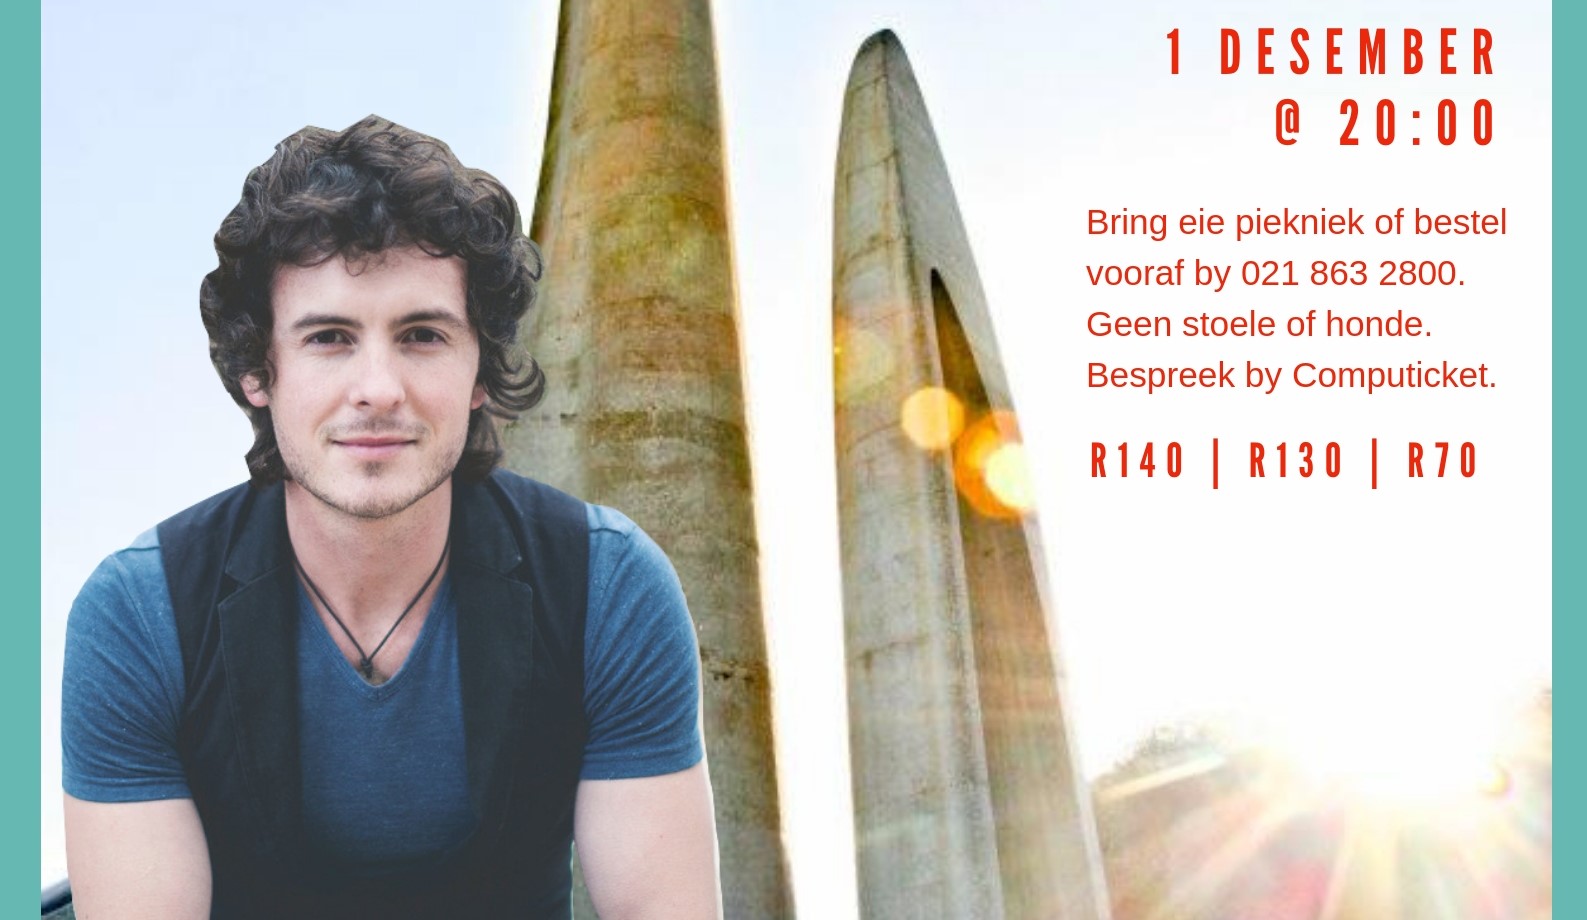 Enter to Win Family Tickets to Joshua na die Reen this December at Die Afrikaanse Taalmonument